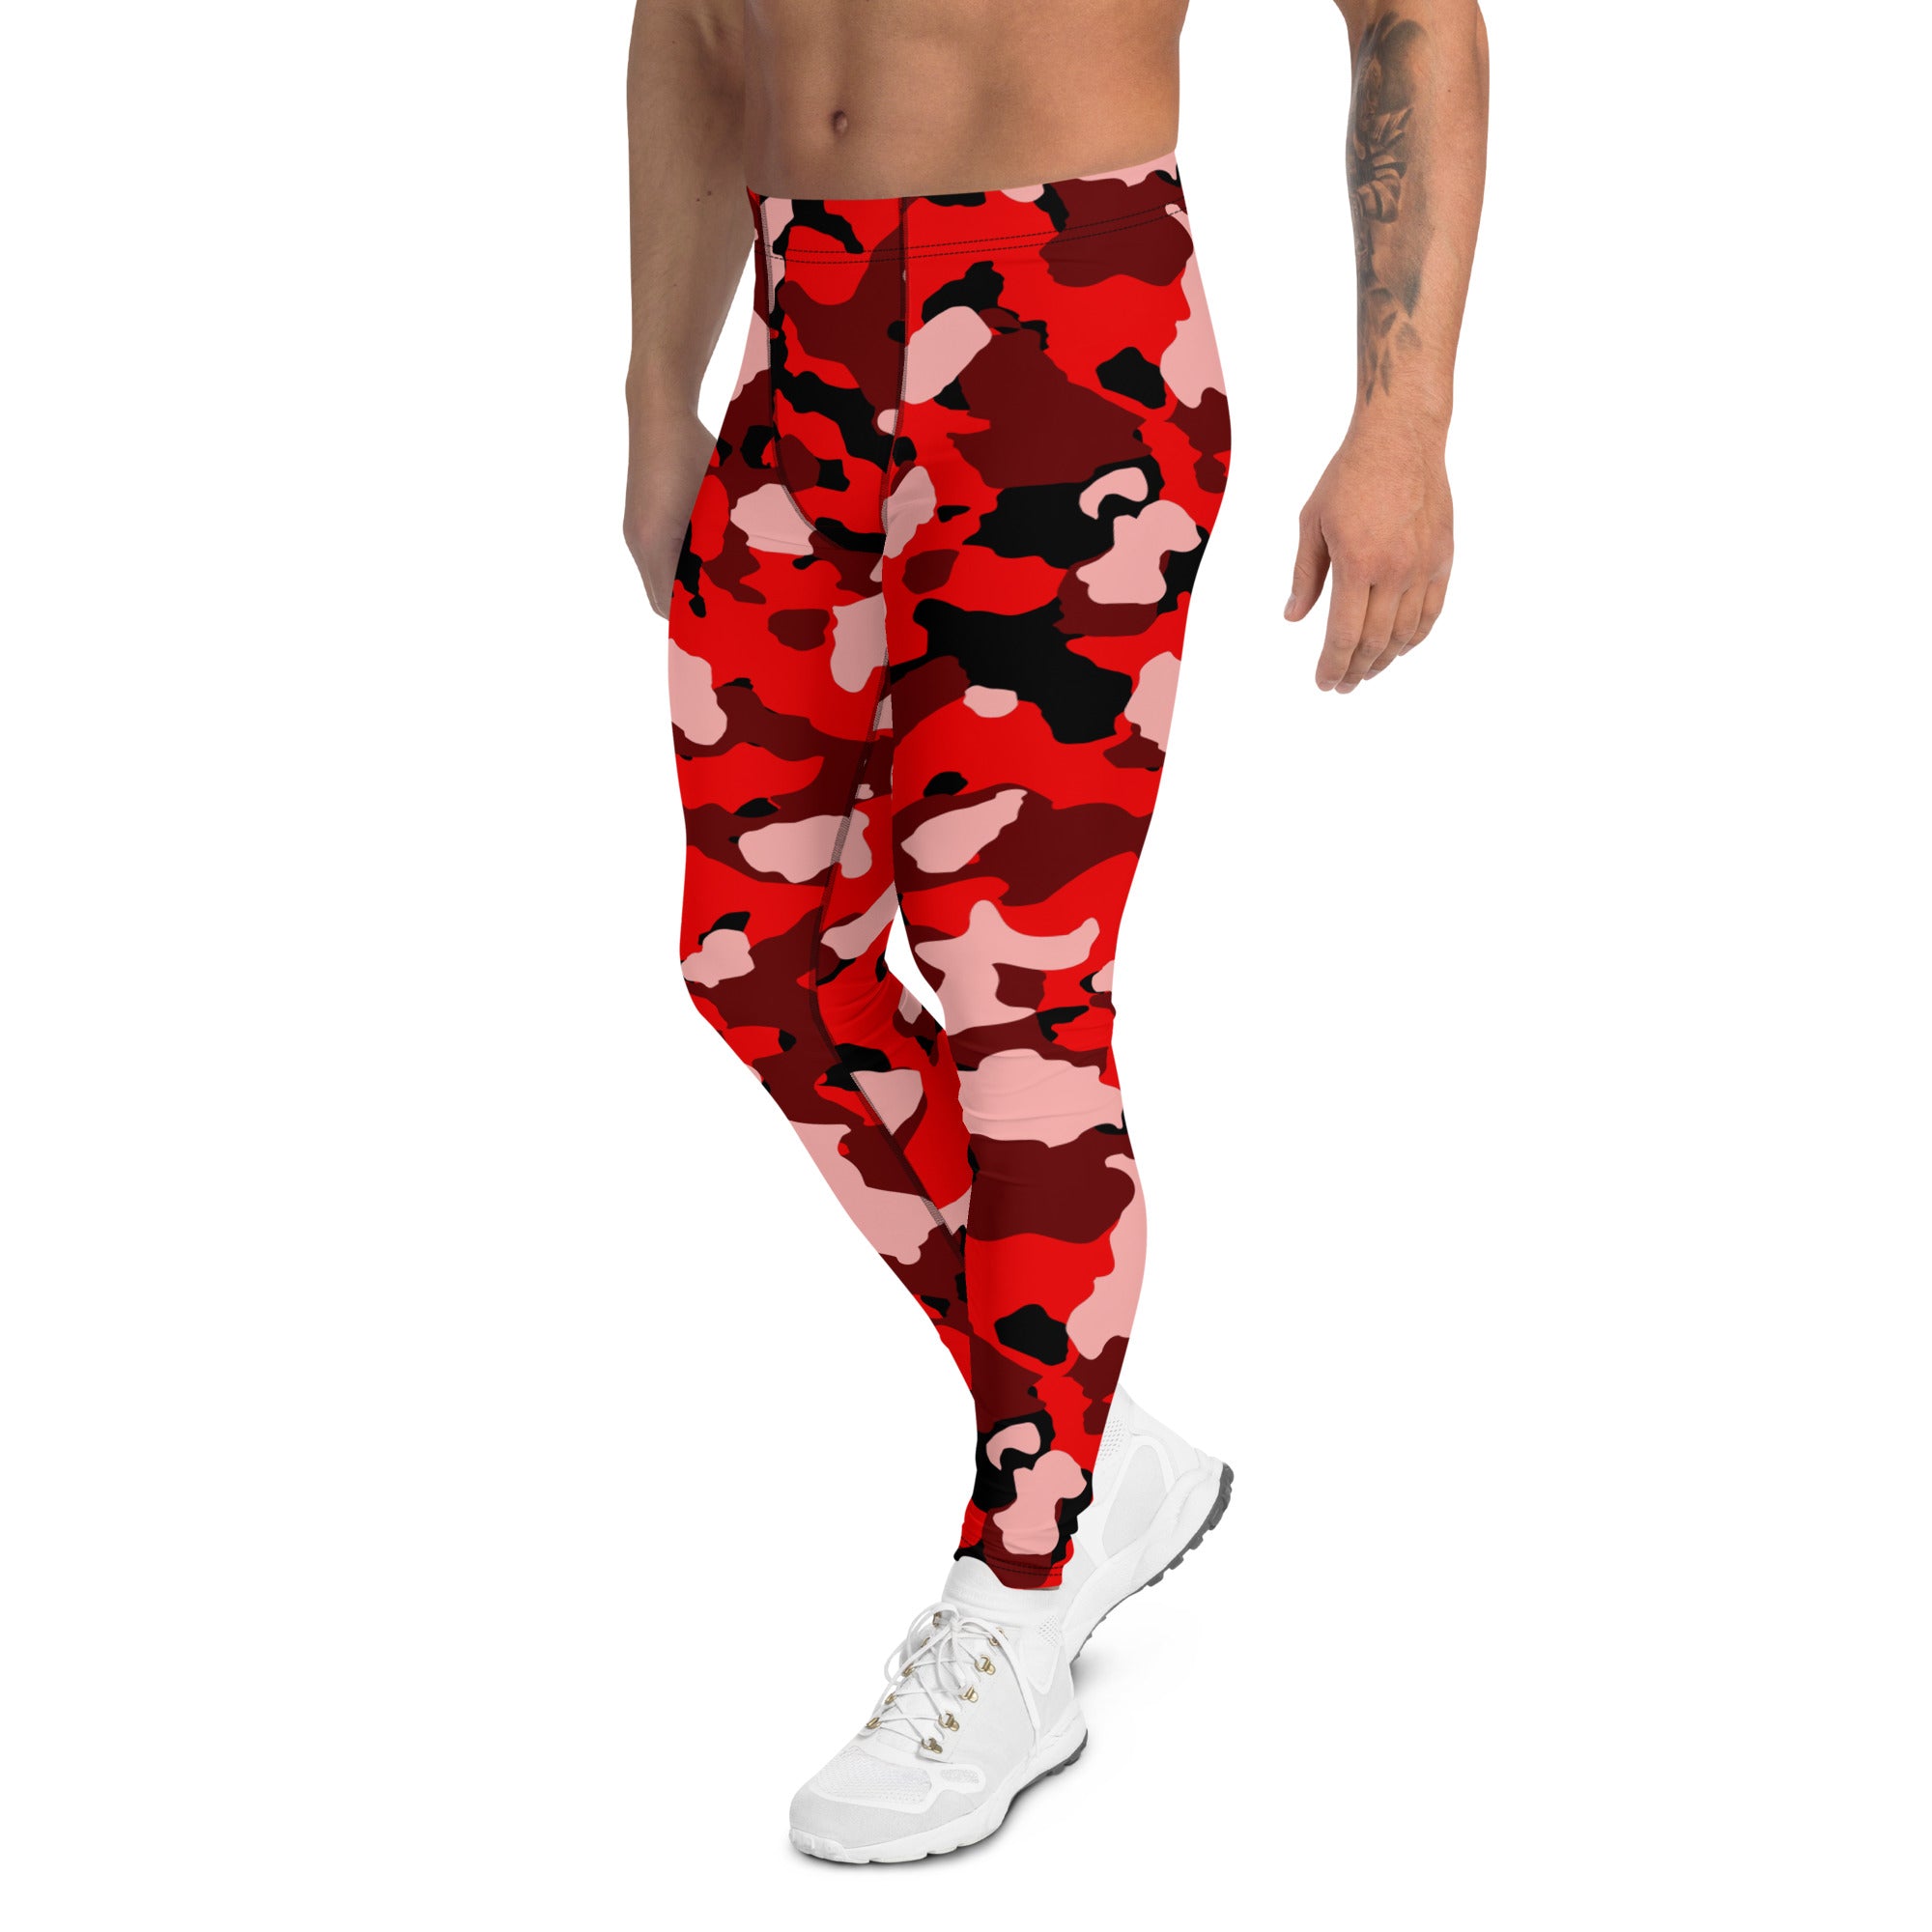 Red Camo Leggings with pockets – Latitude 18